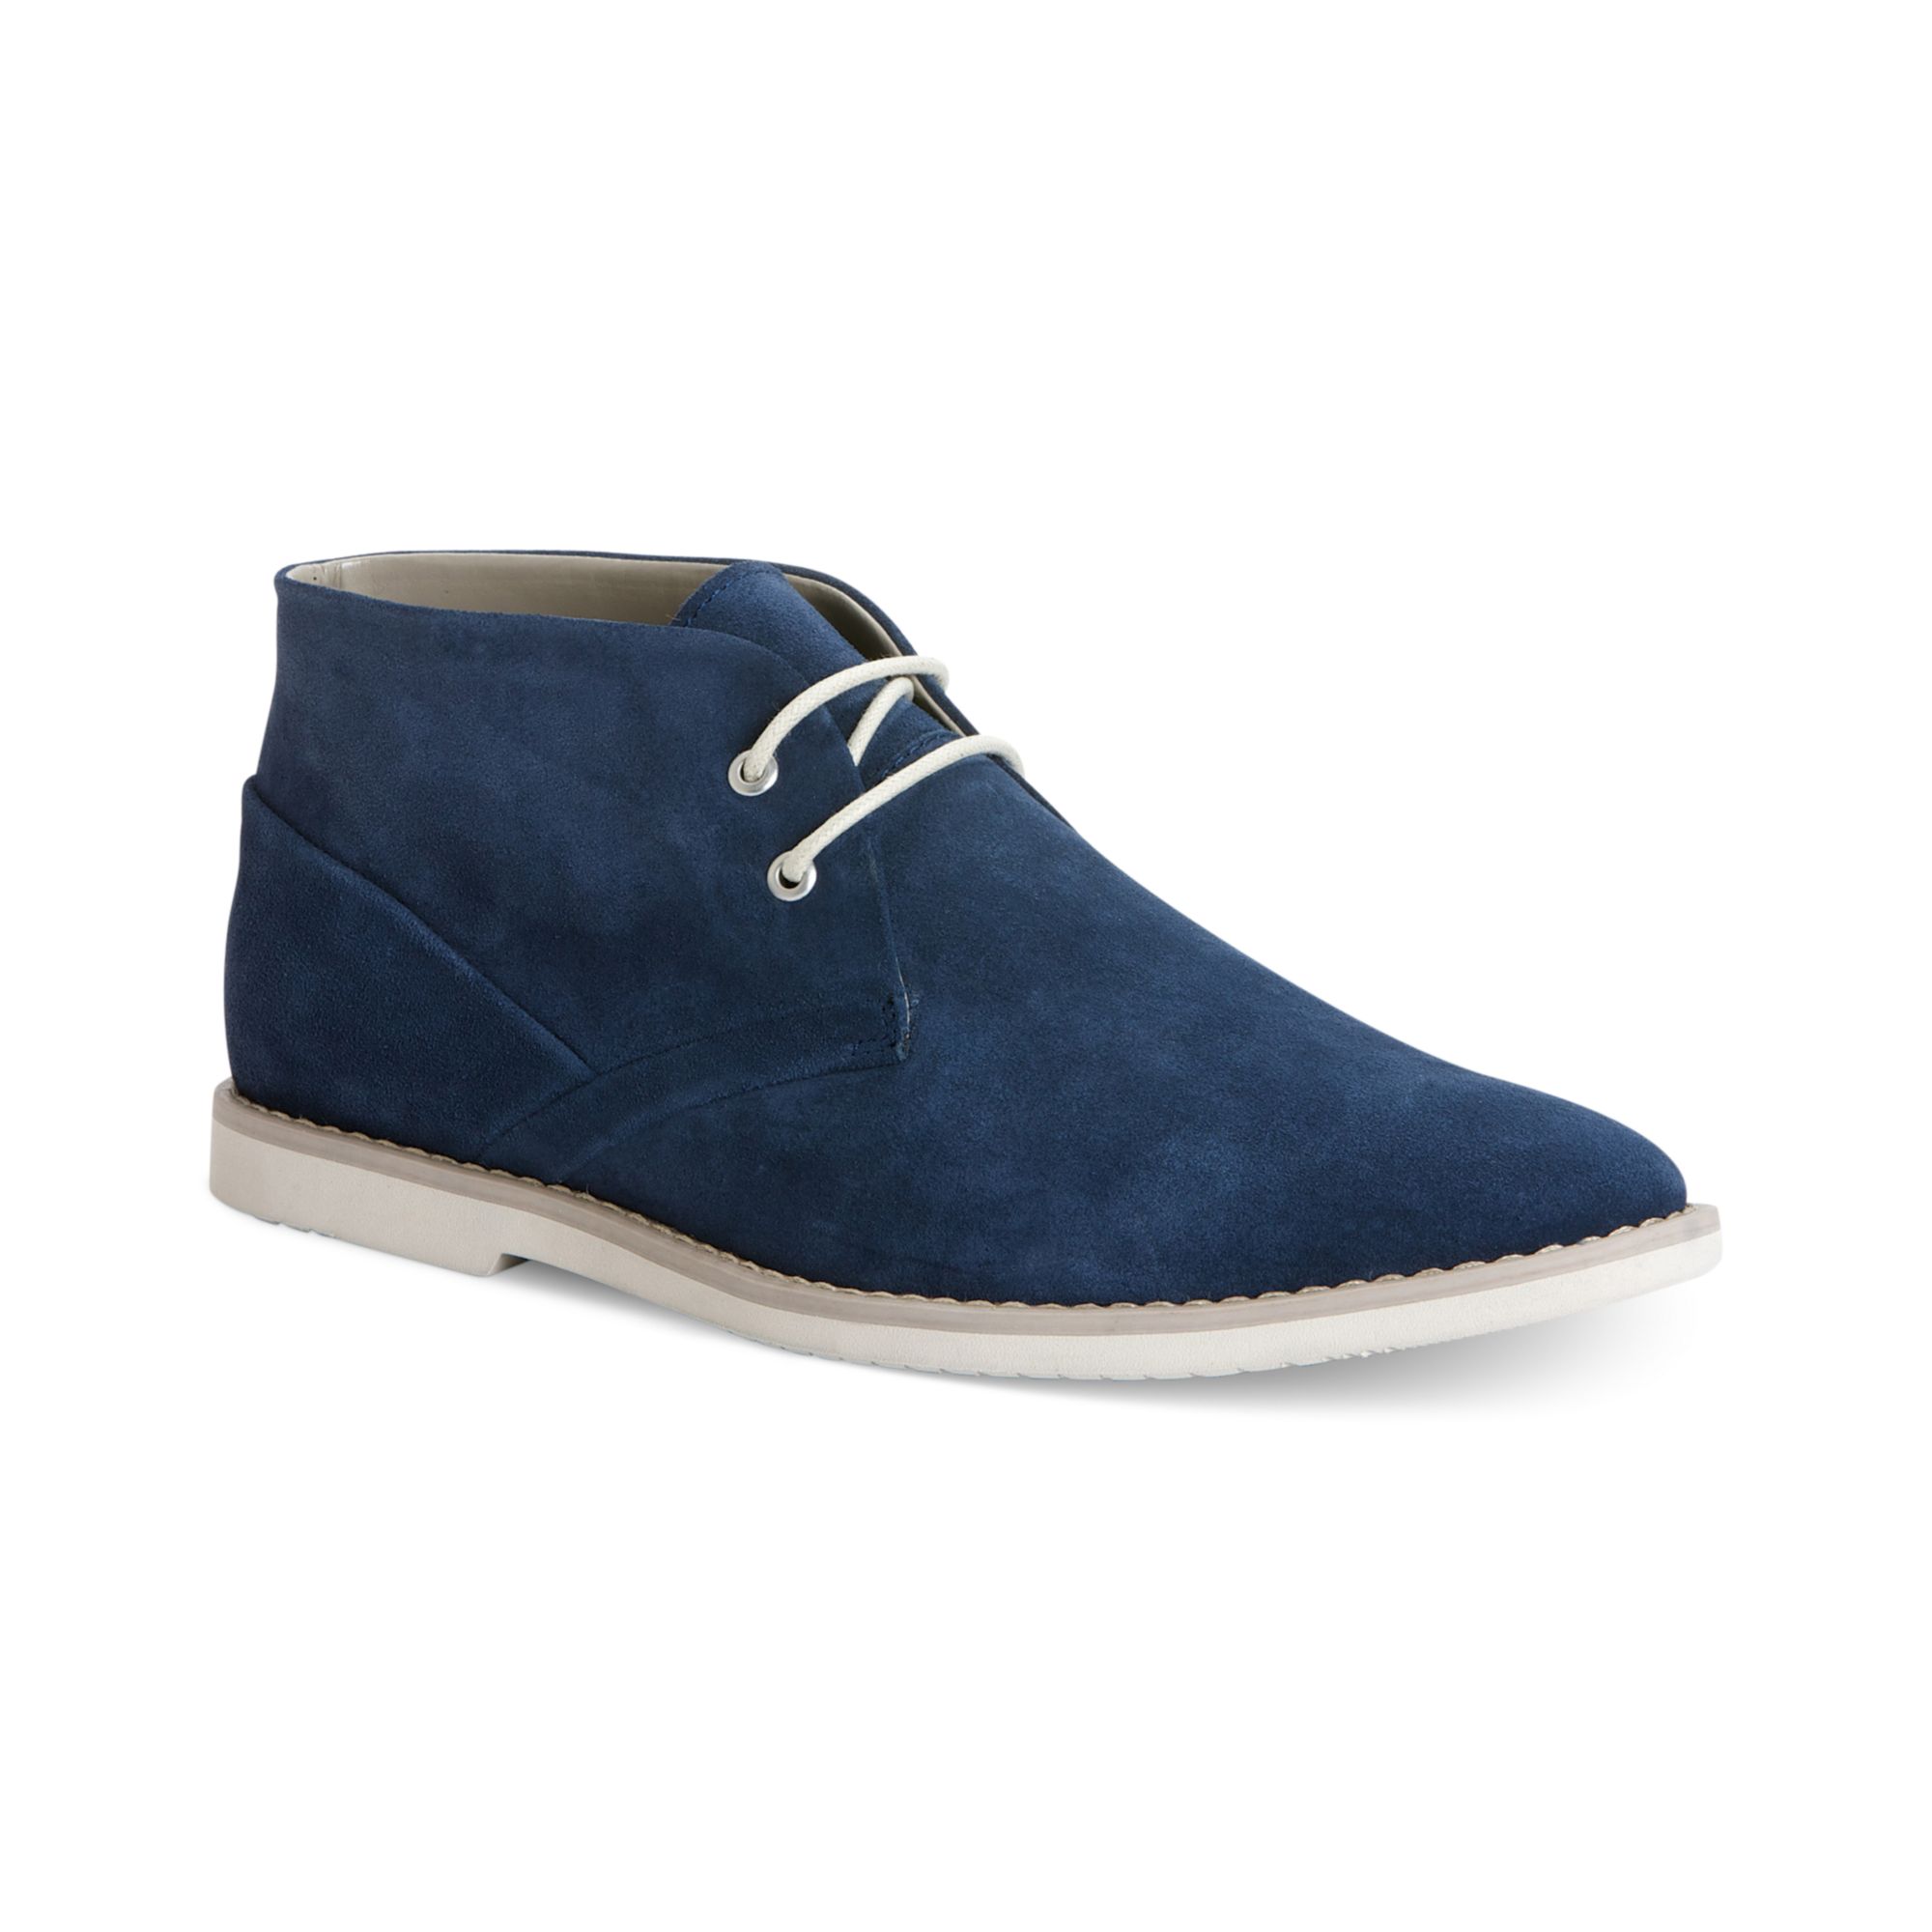 Calvin Klein Ference Suede Chukka Boots in Blue for Men - Lyst